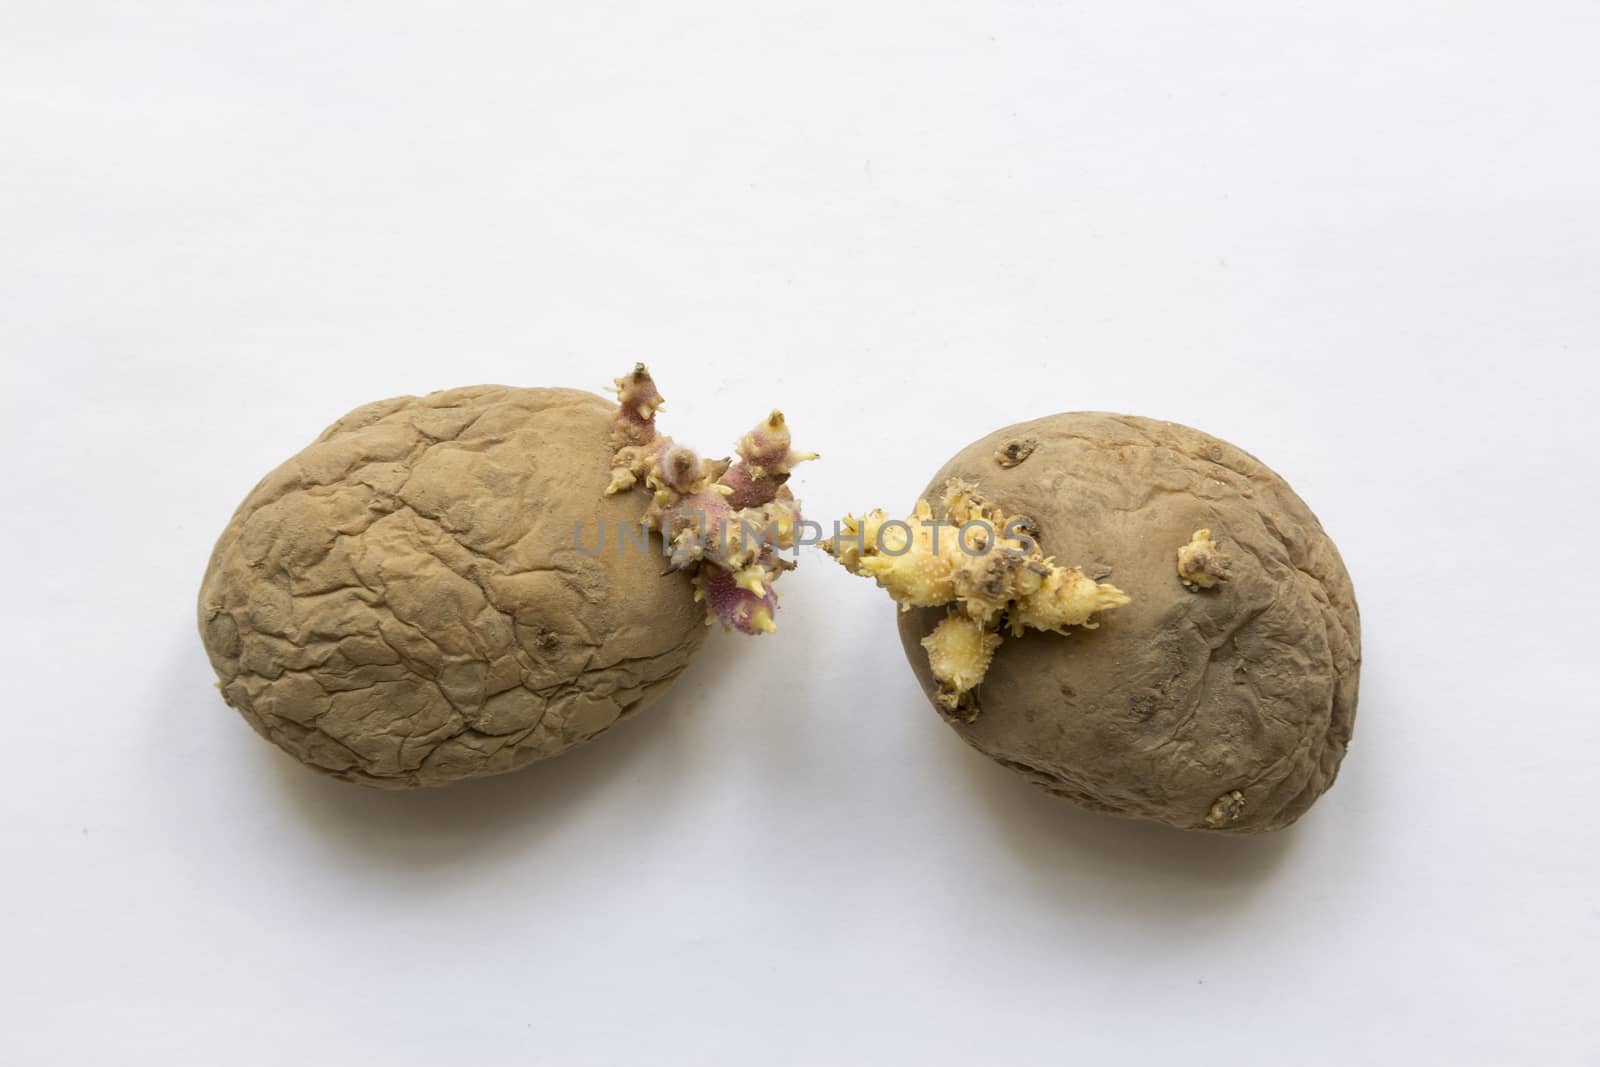 rotten old sprouting potatoes on a light background